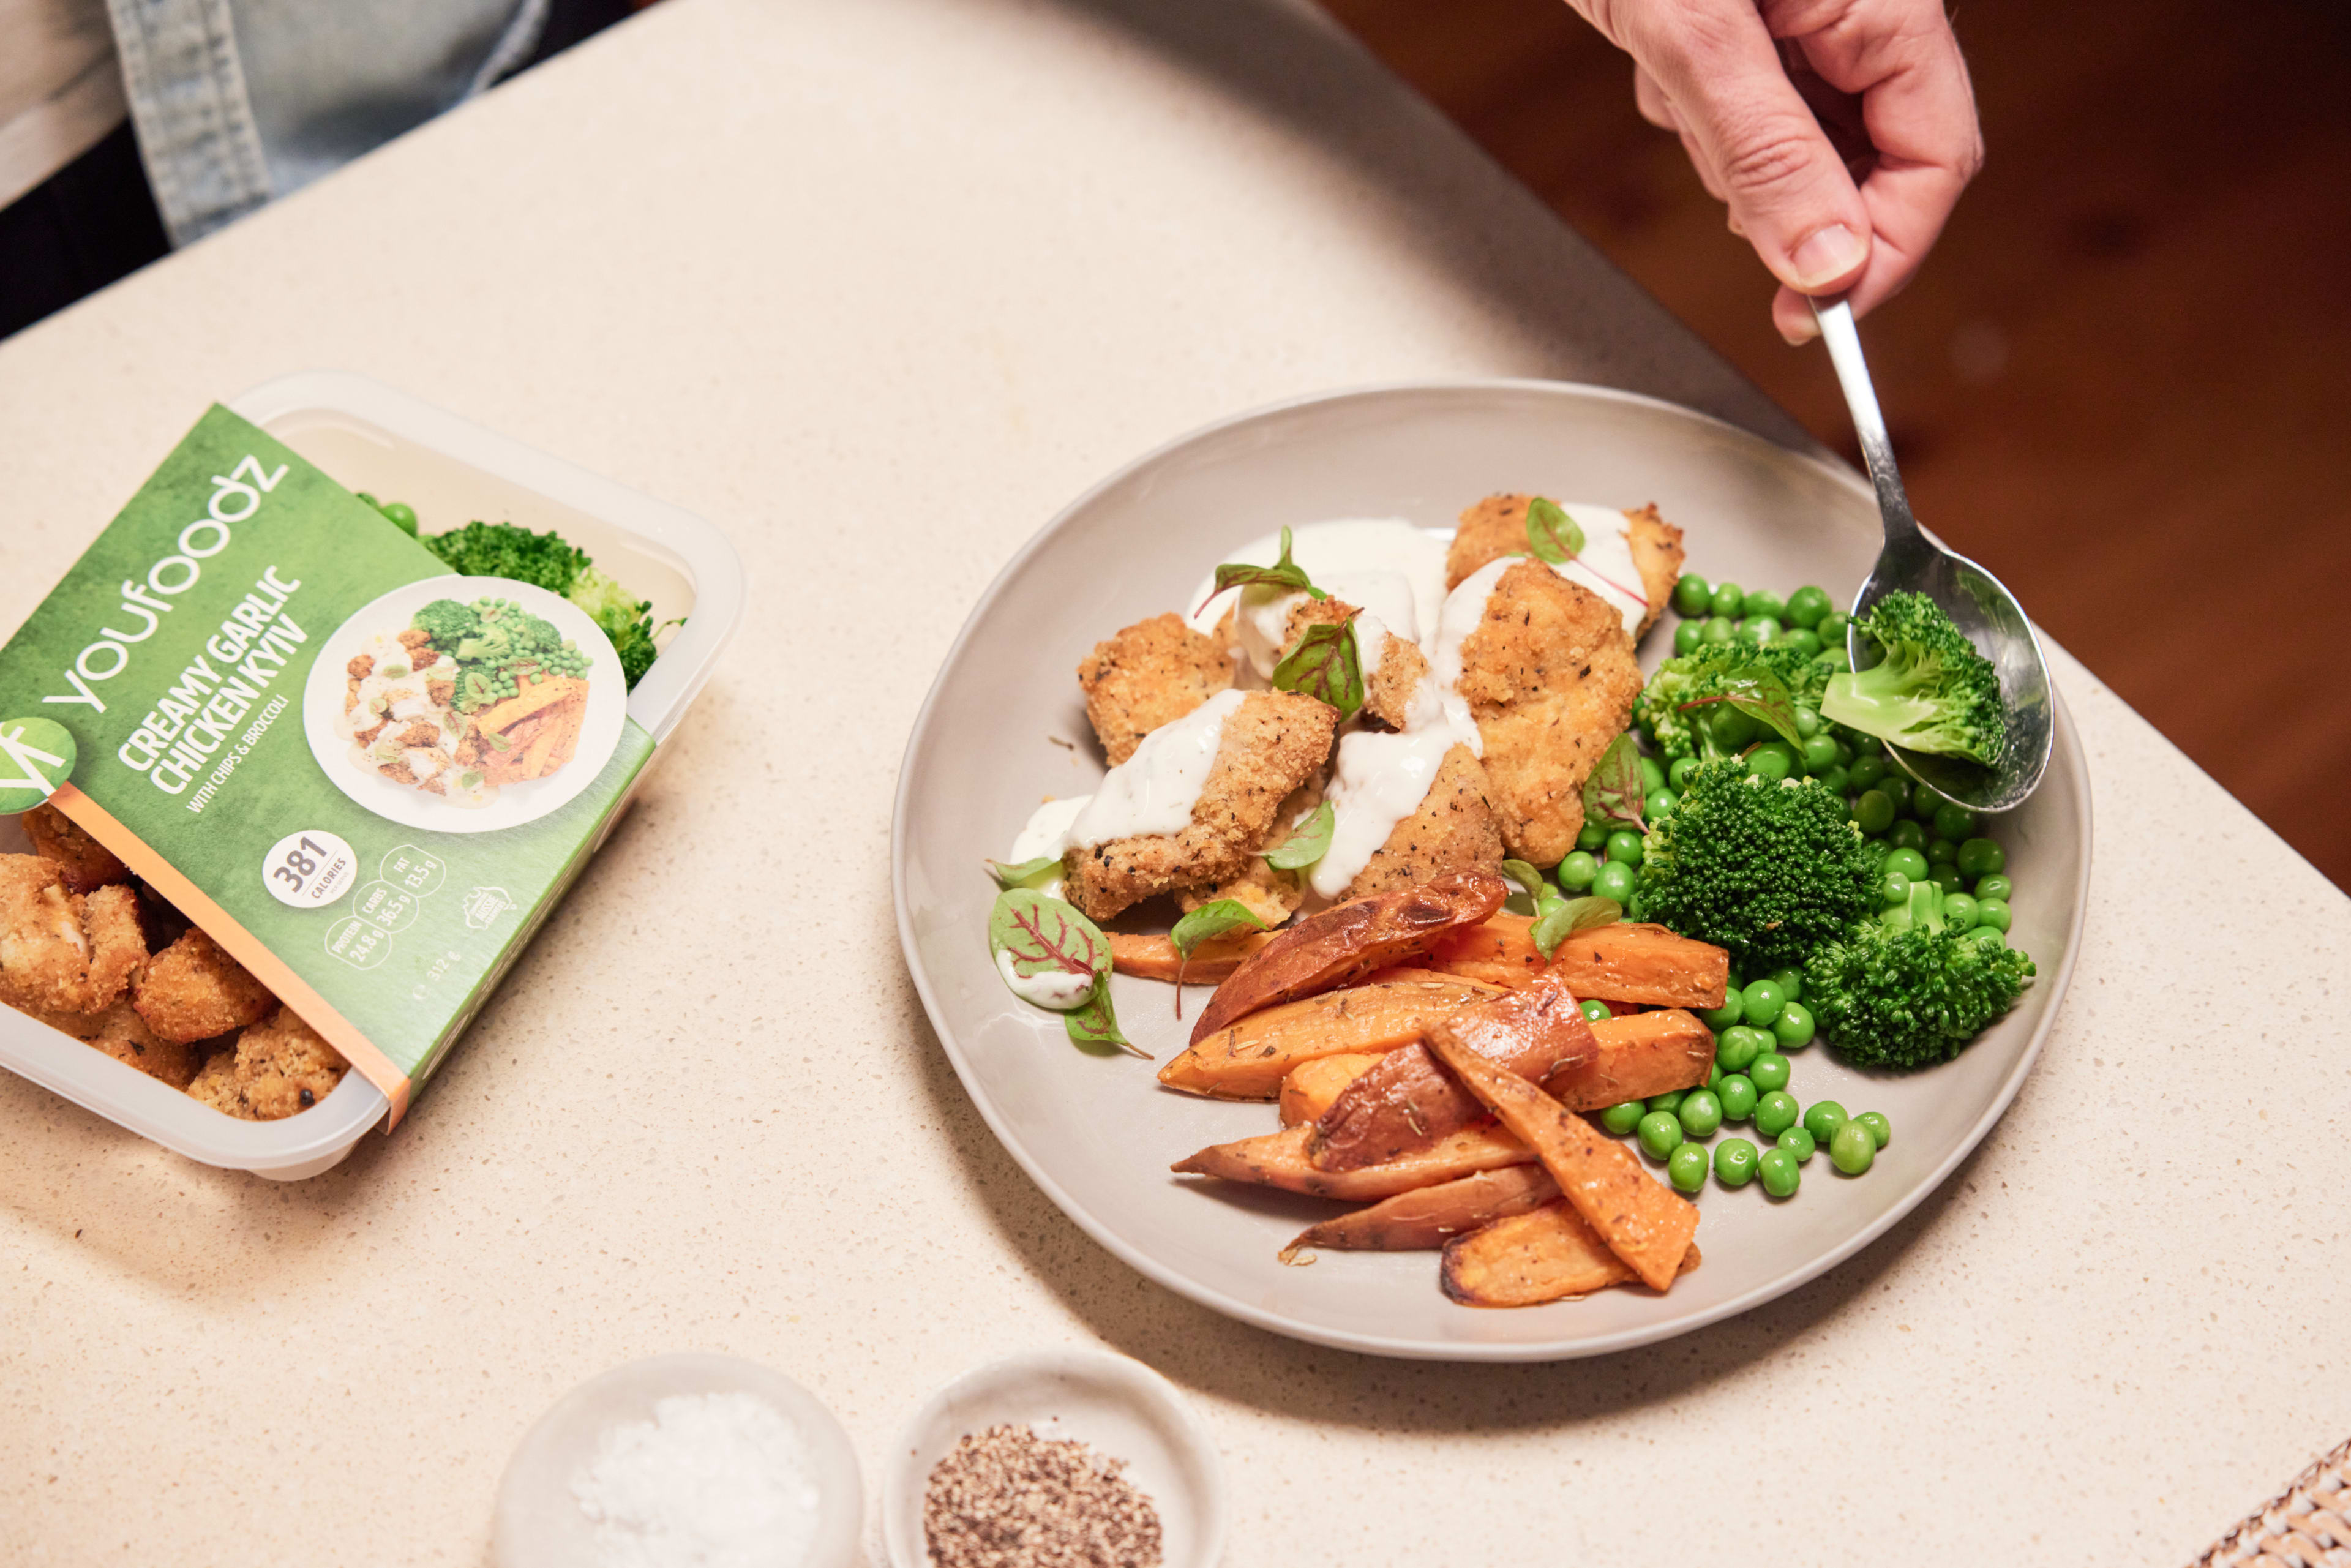 Enjoy Healthy, Chef-Developed Meals Delivered Directly to Your Door